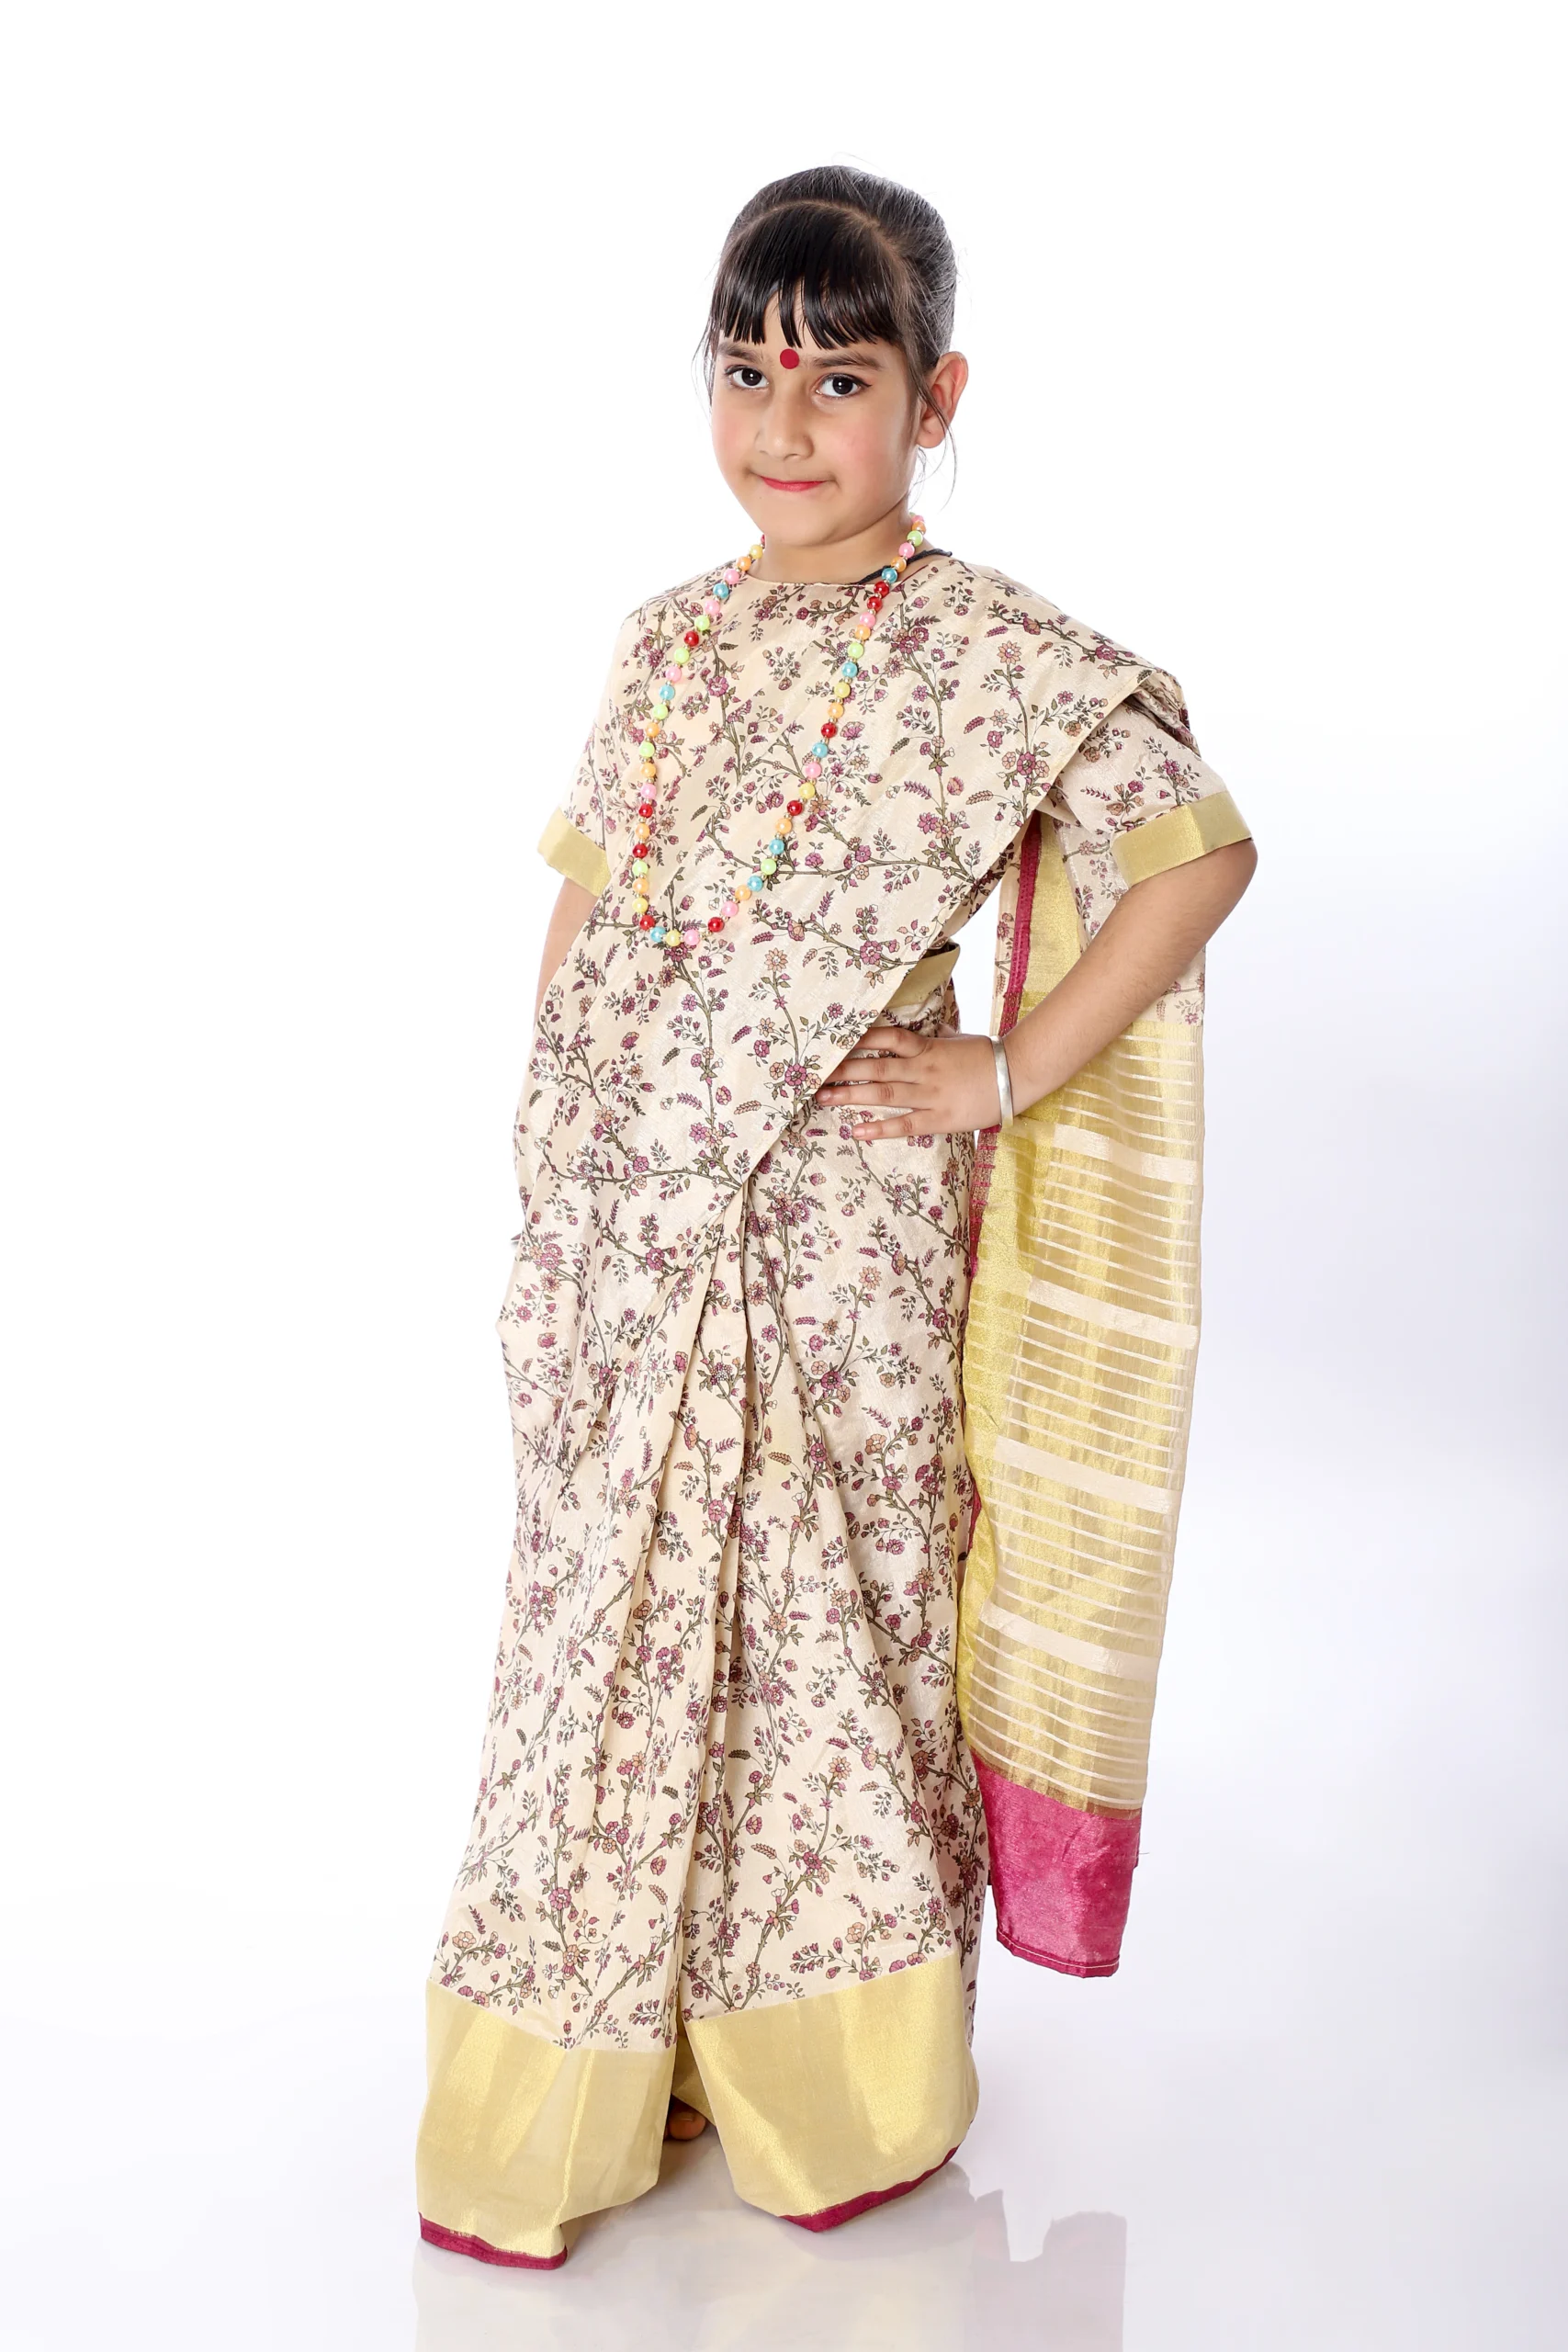 Ramayan Characters | Buy or Rent Kids Fancy Dress Costume in India